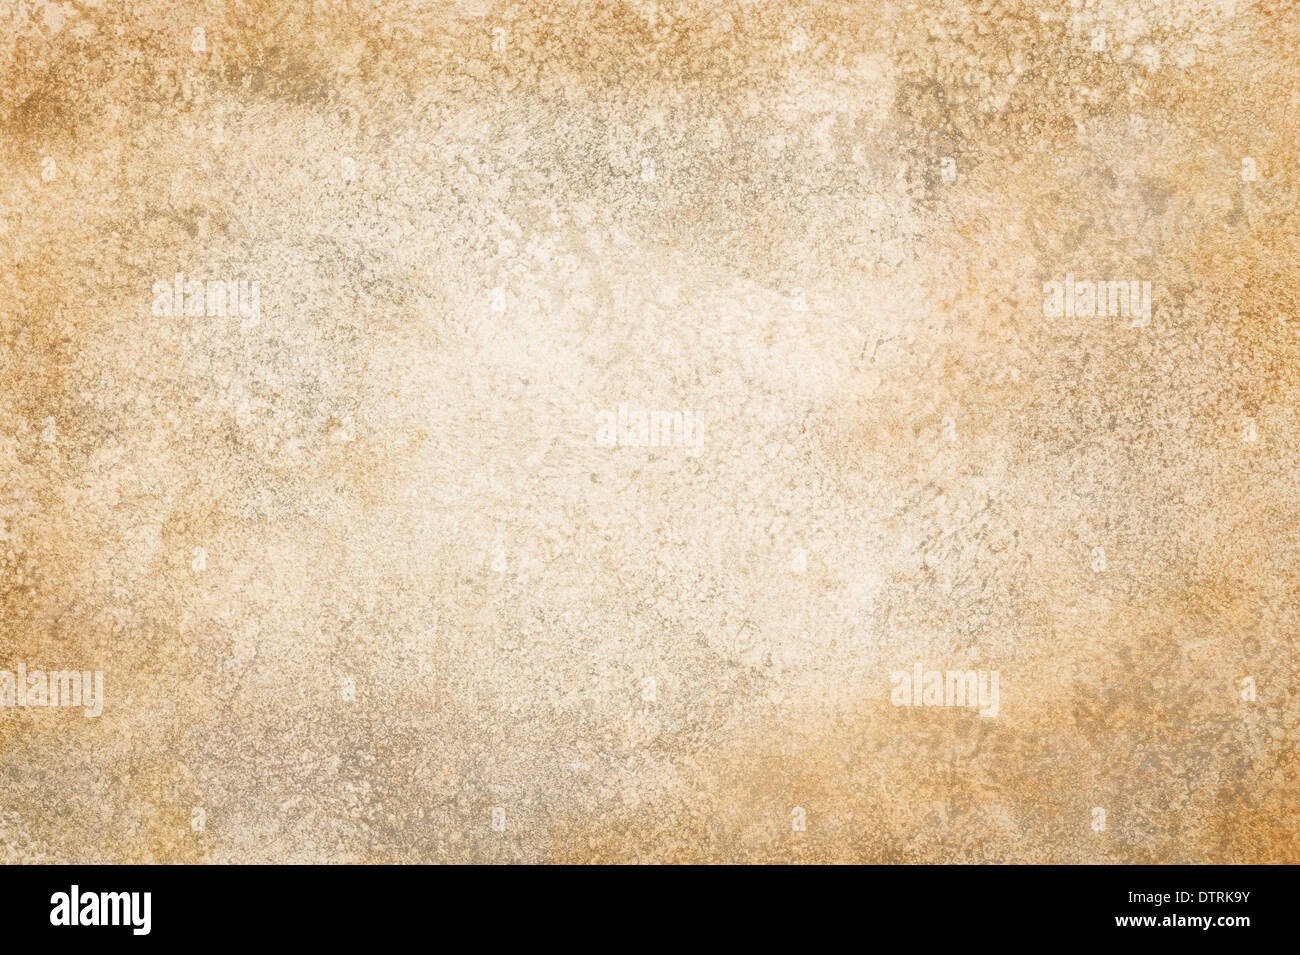 Stained old grunge vintage background  Stock Photo